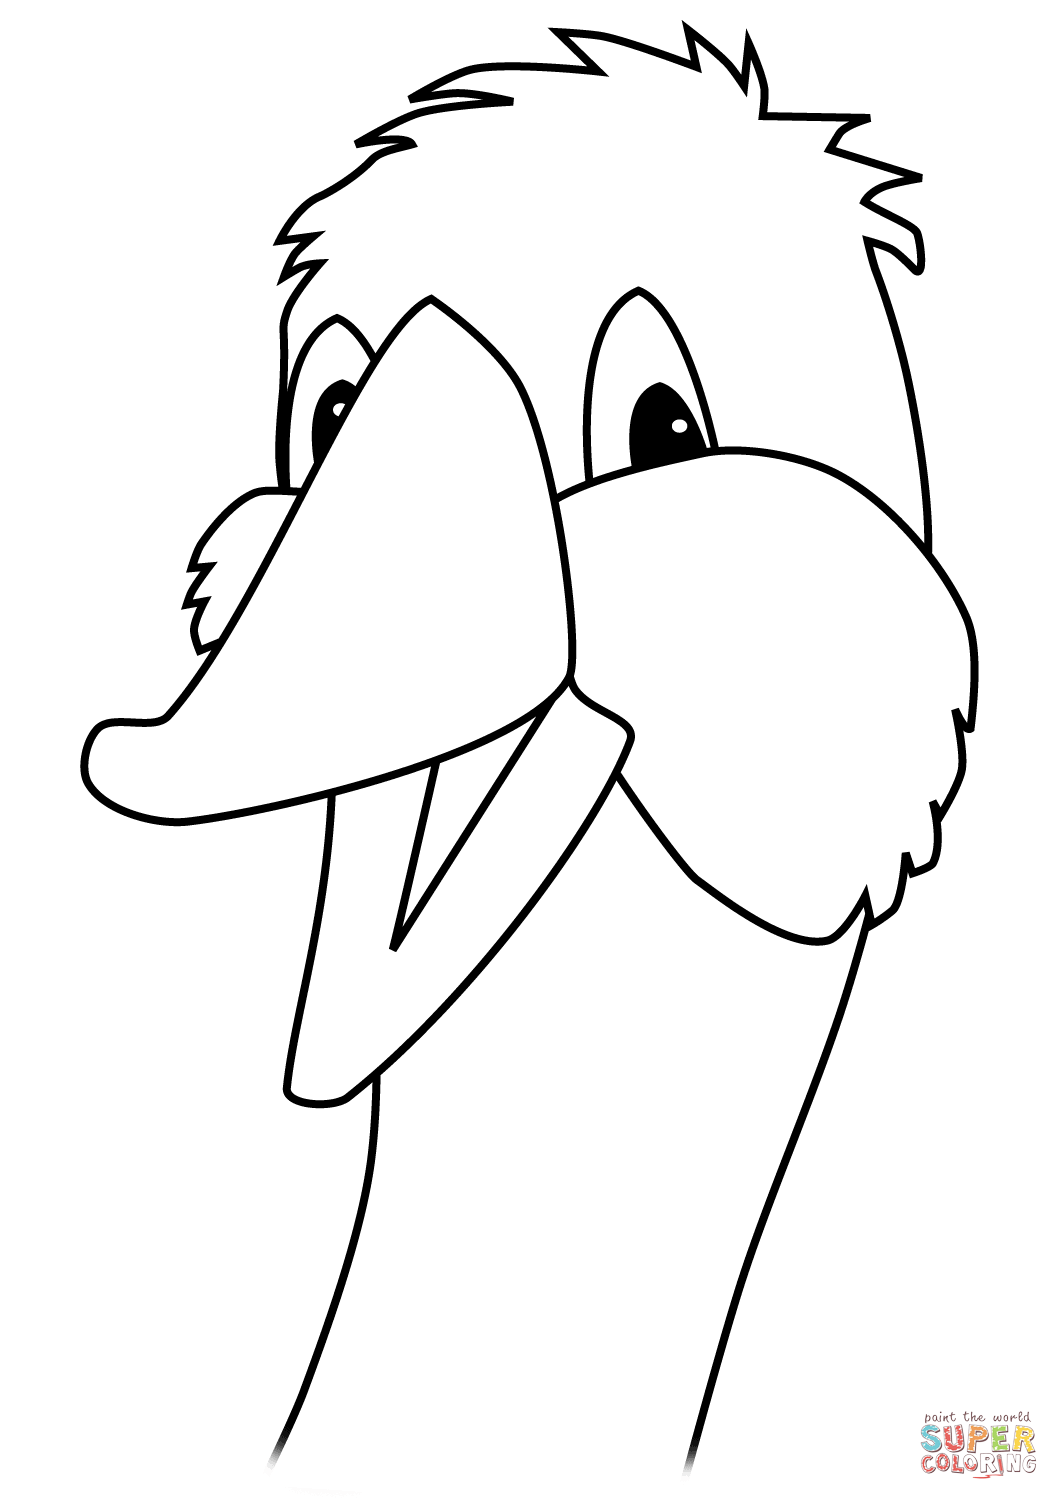 Cartoon goose head coloring page free printable coloring pages